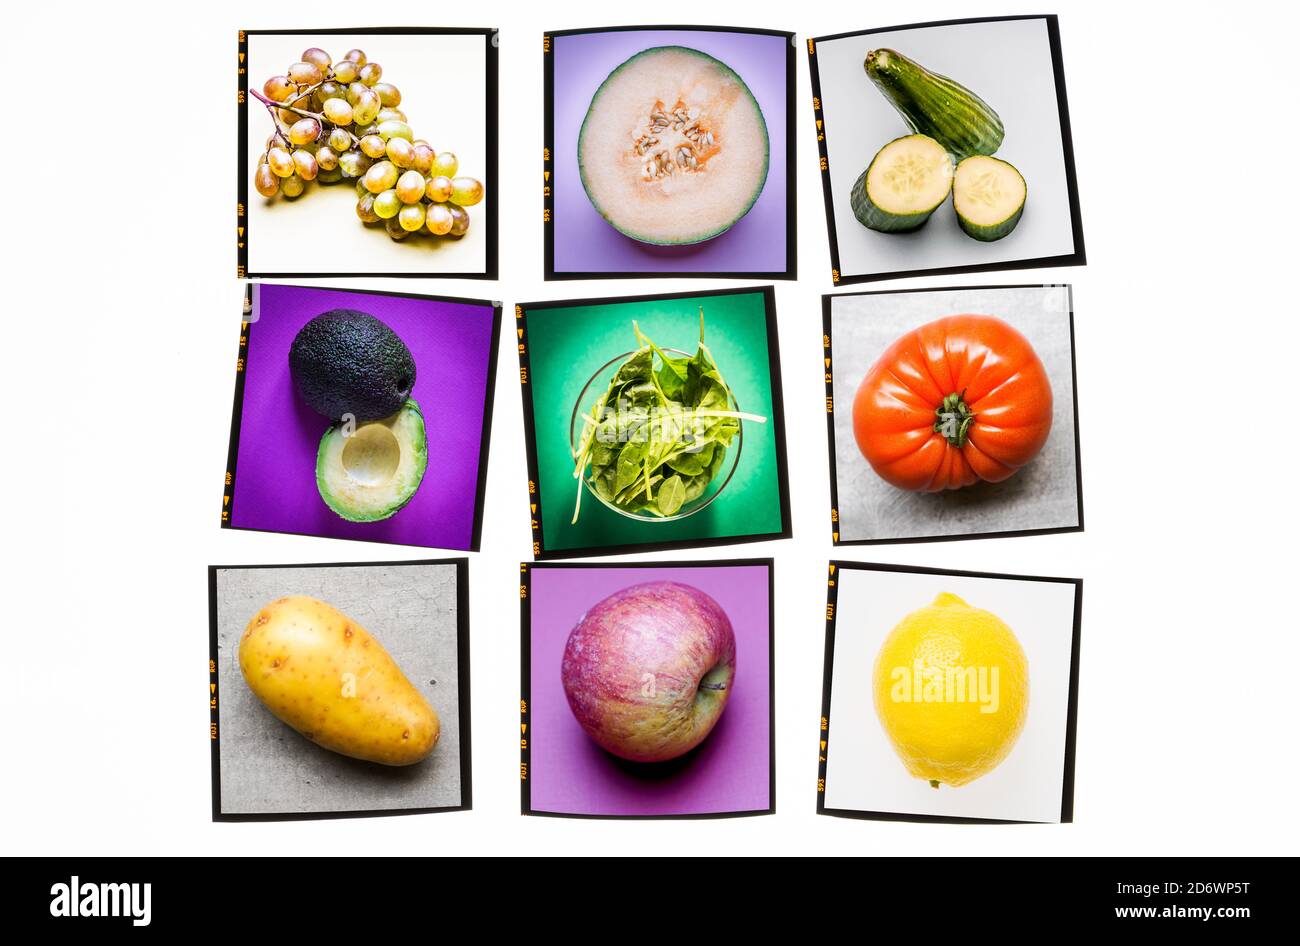 Assortment of fruits and vegetables. Stock Photo